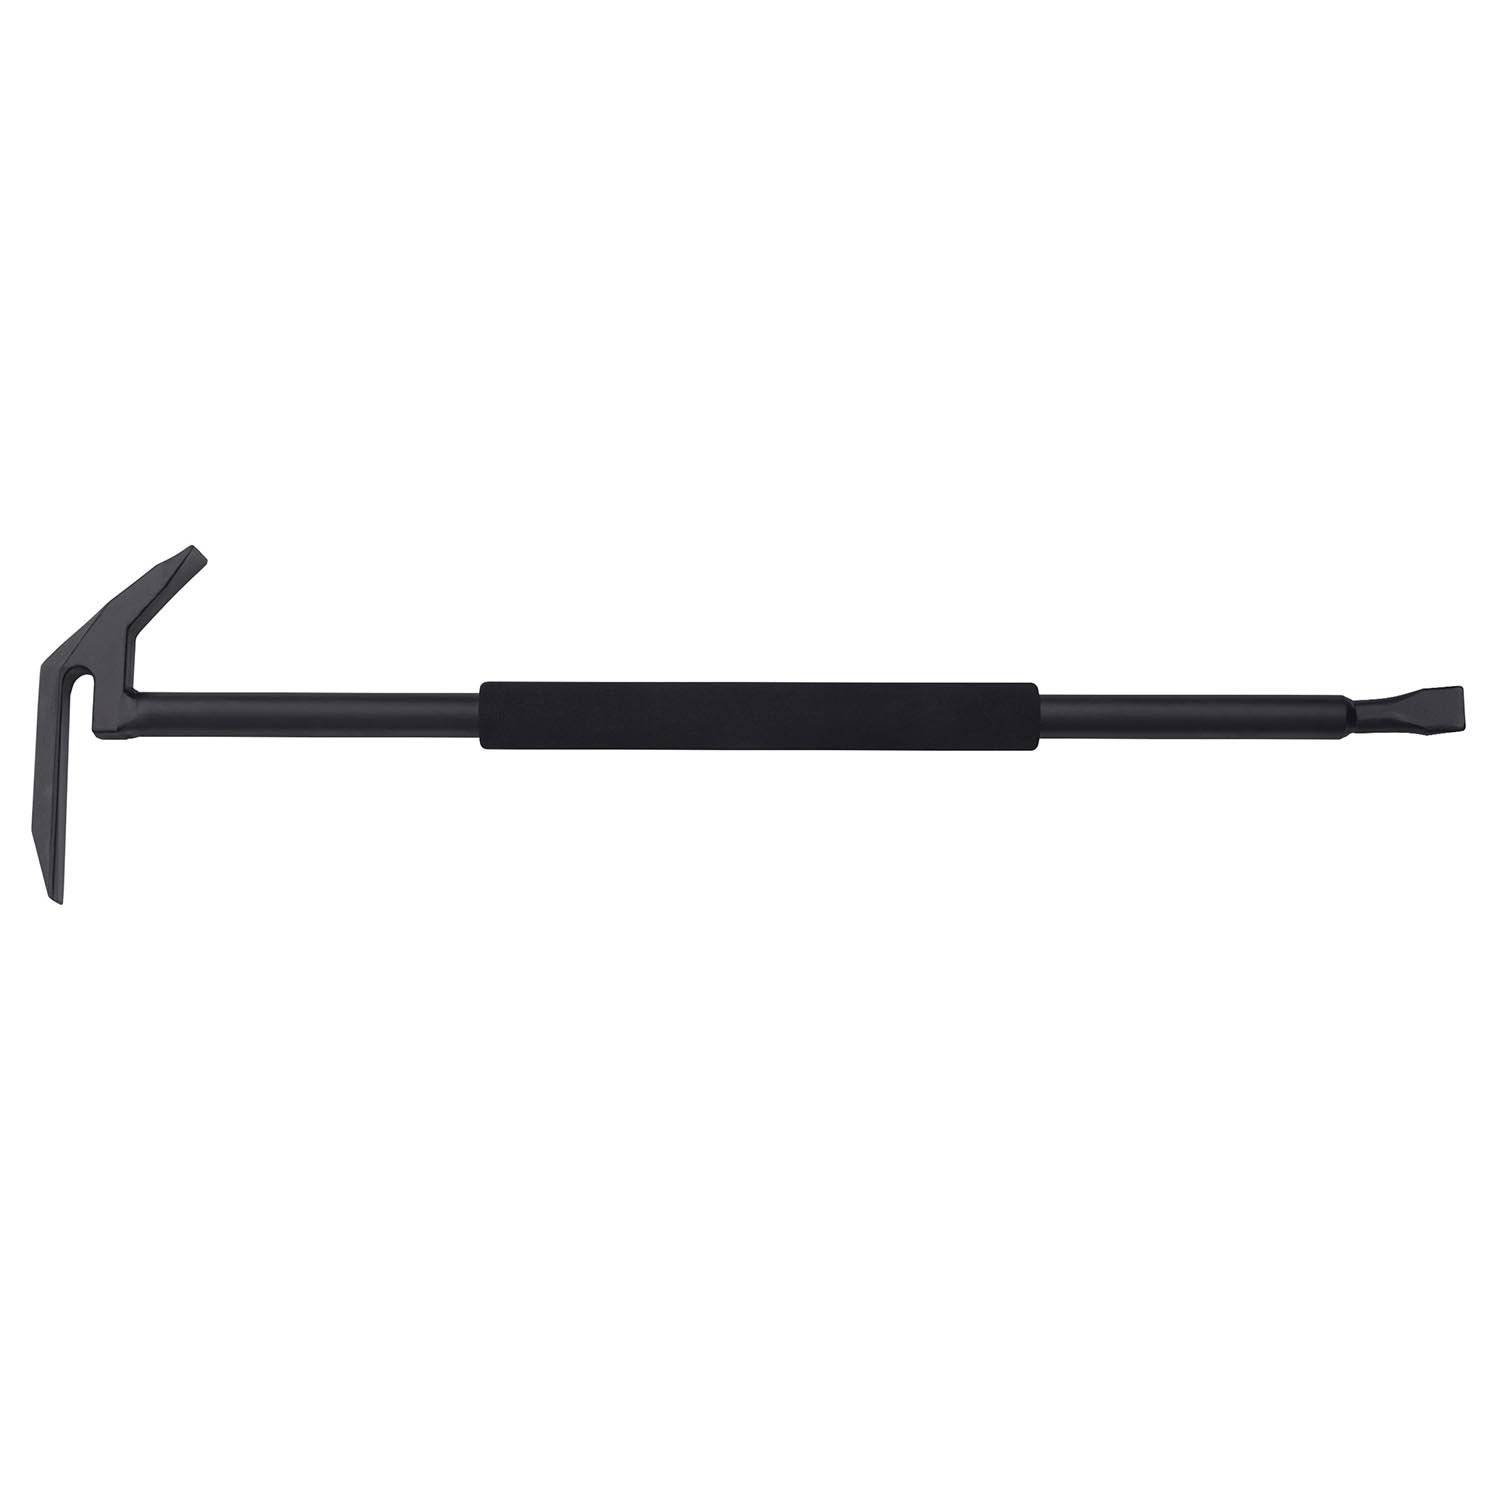 Leatherhead Tools 3' Lockwood Hook with Chisel End and Strap